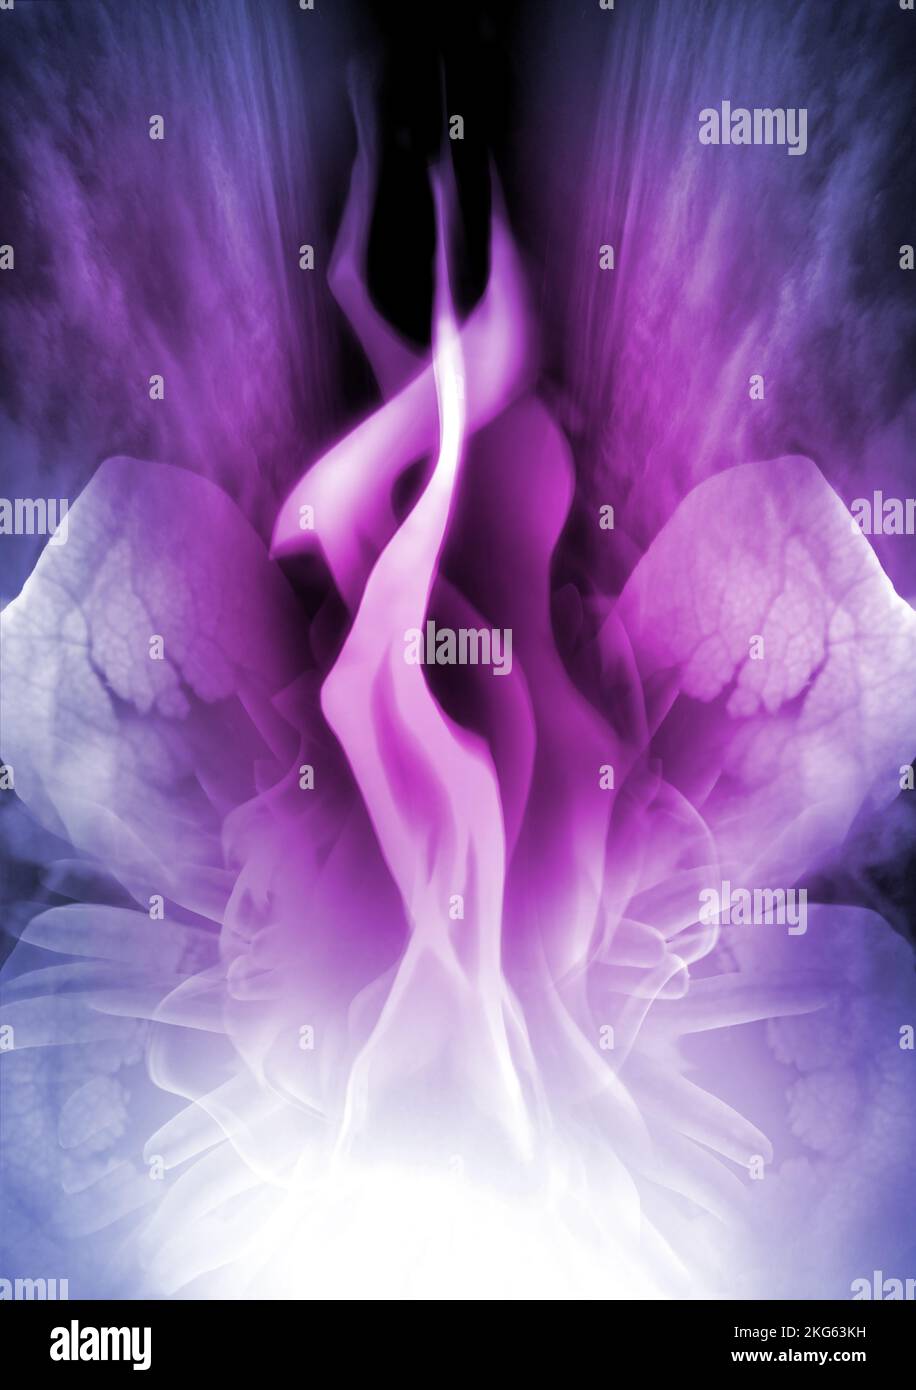 Poster/Wallpaper 'The Violet Flame of Saint Germain' - Divine Energy - Transformation Stock Photo